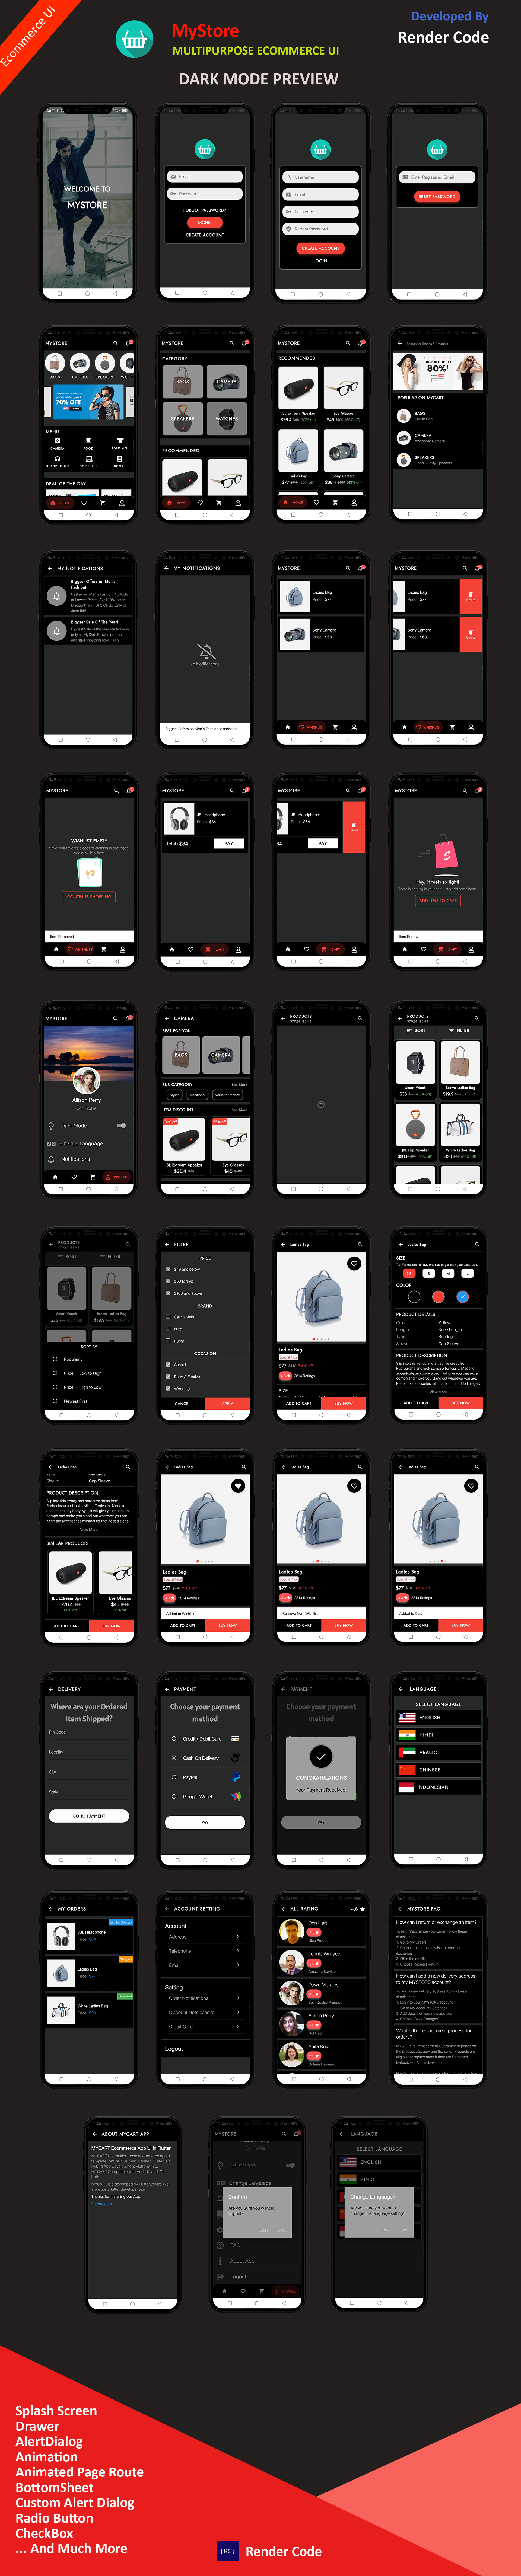 Flutter Ecommerce App UI Template with Light and Dark Mode (Multi Language) - 4